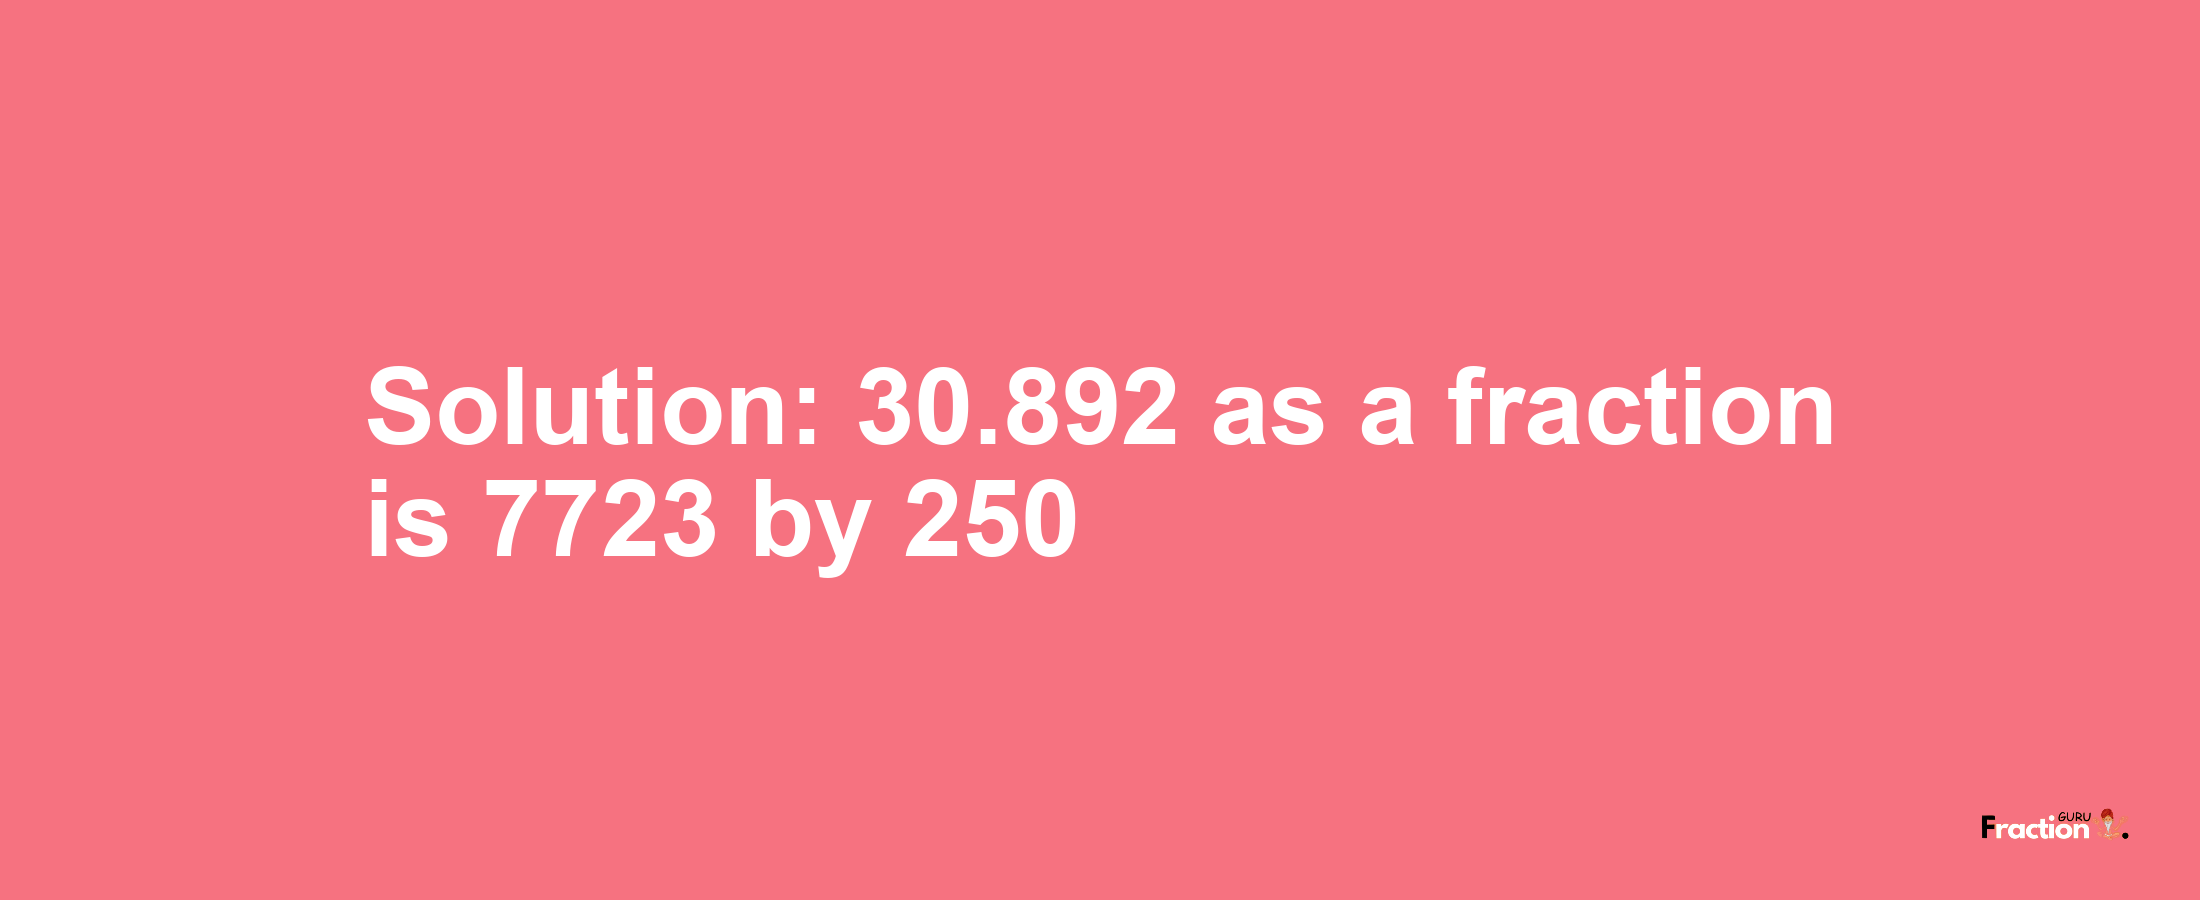 Solution:30.892 as a fraction is 7723/250